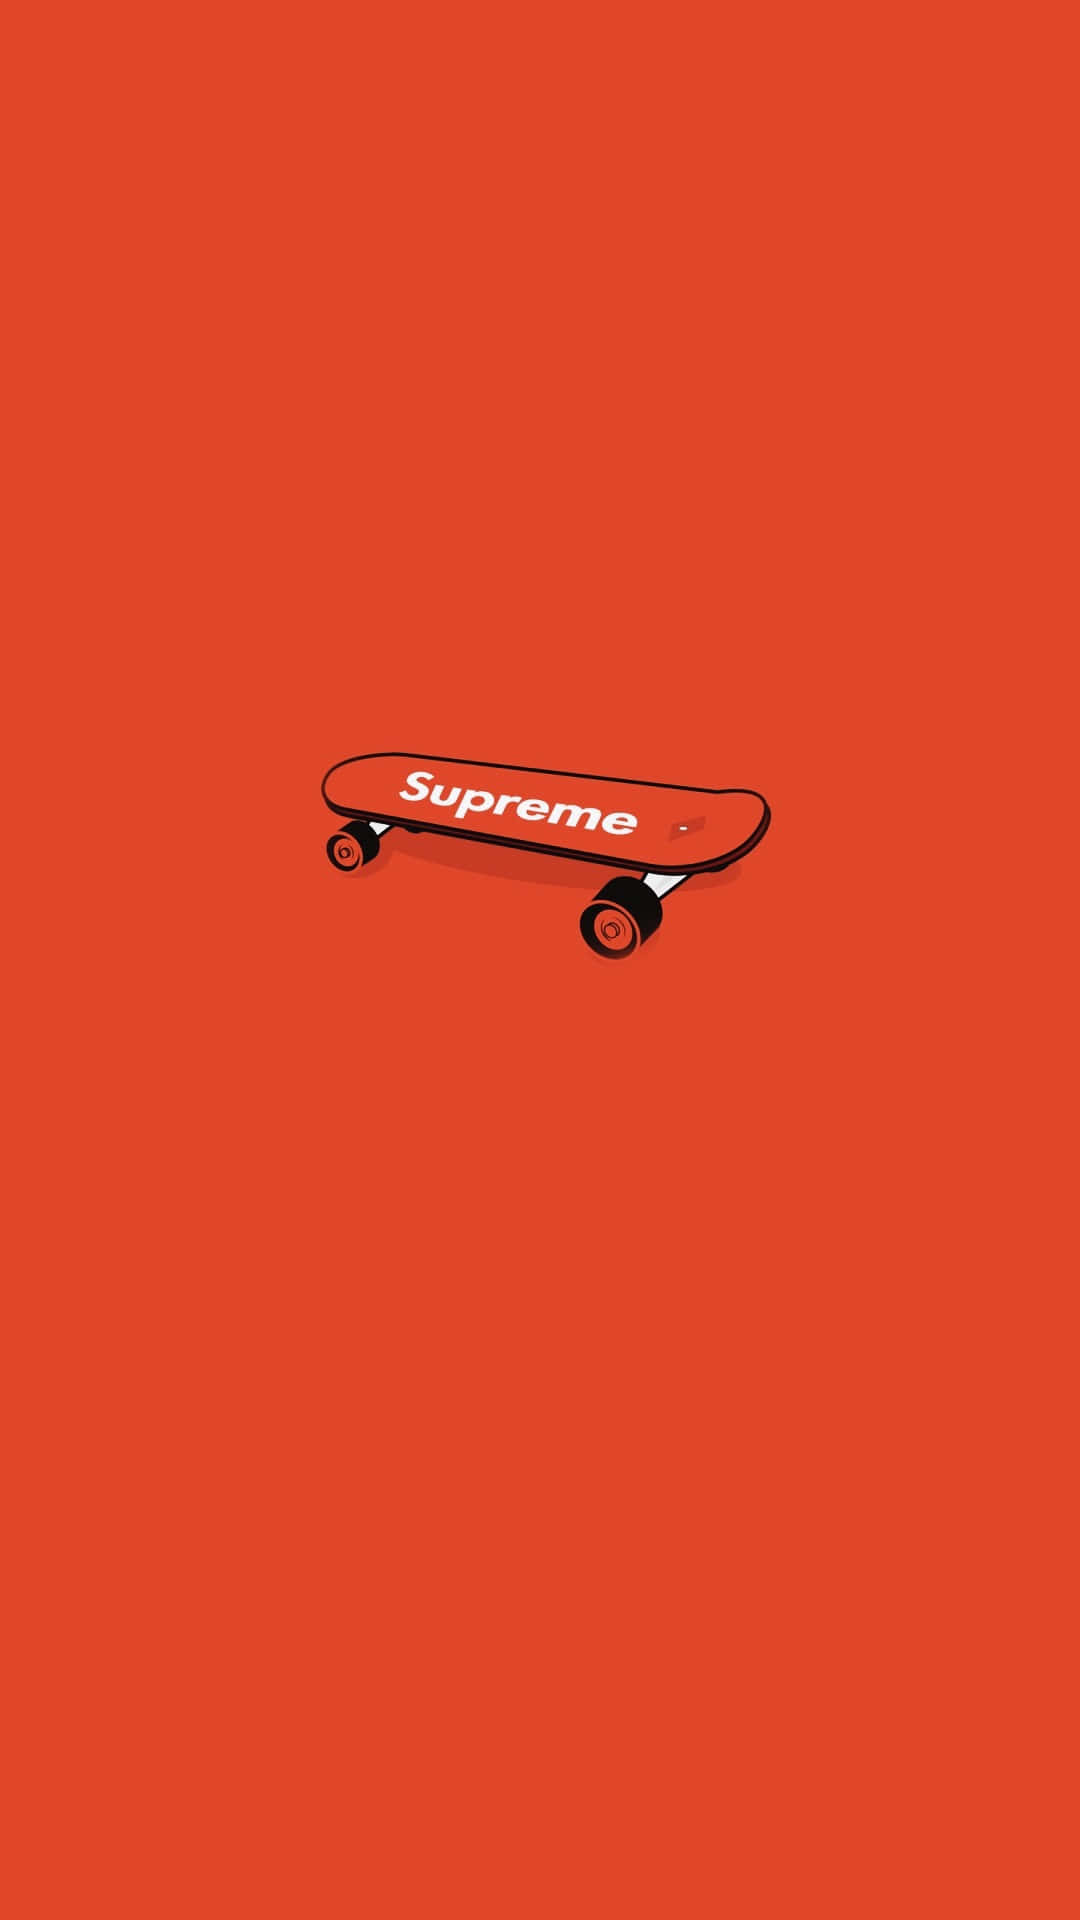 The official Supreme Logo - a fashionable and iconic sign of modern style Wallpaper